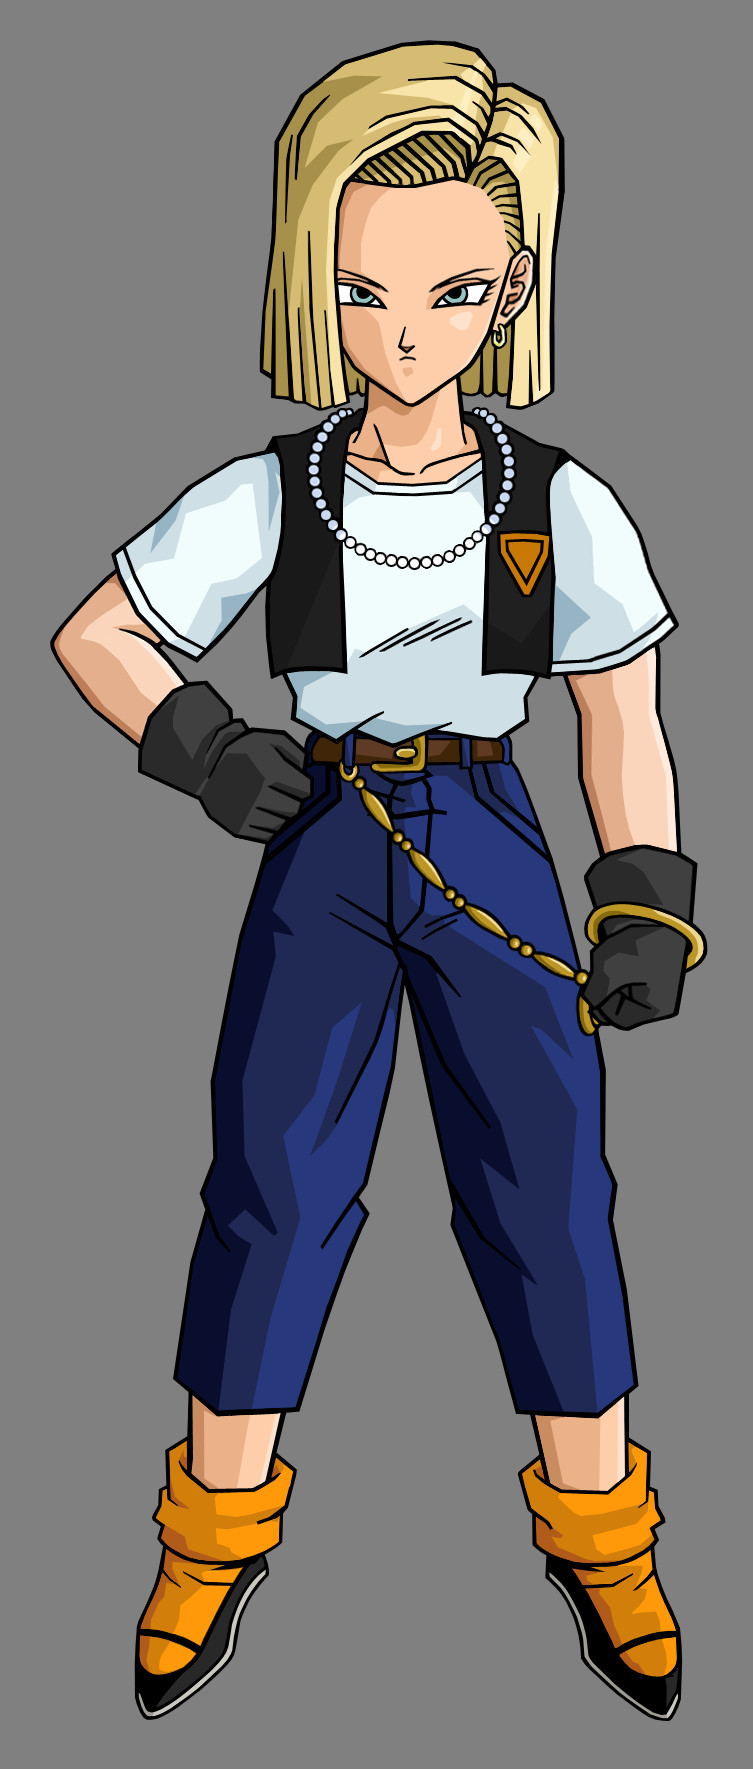 Android_18_by_hsvhrt.jpg